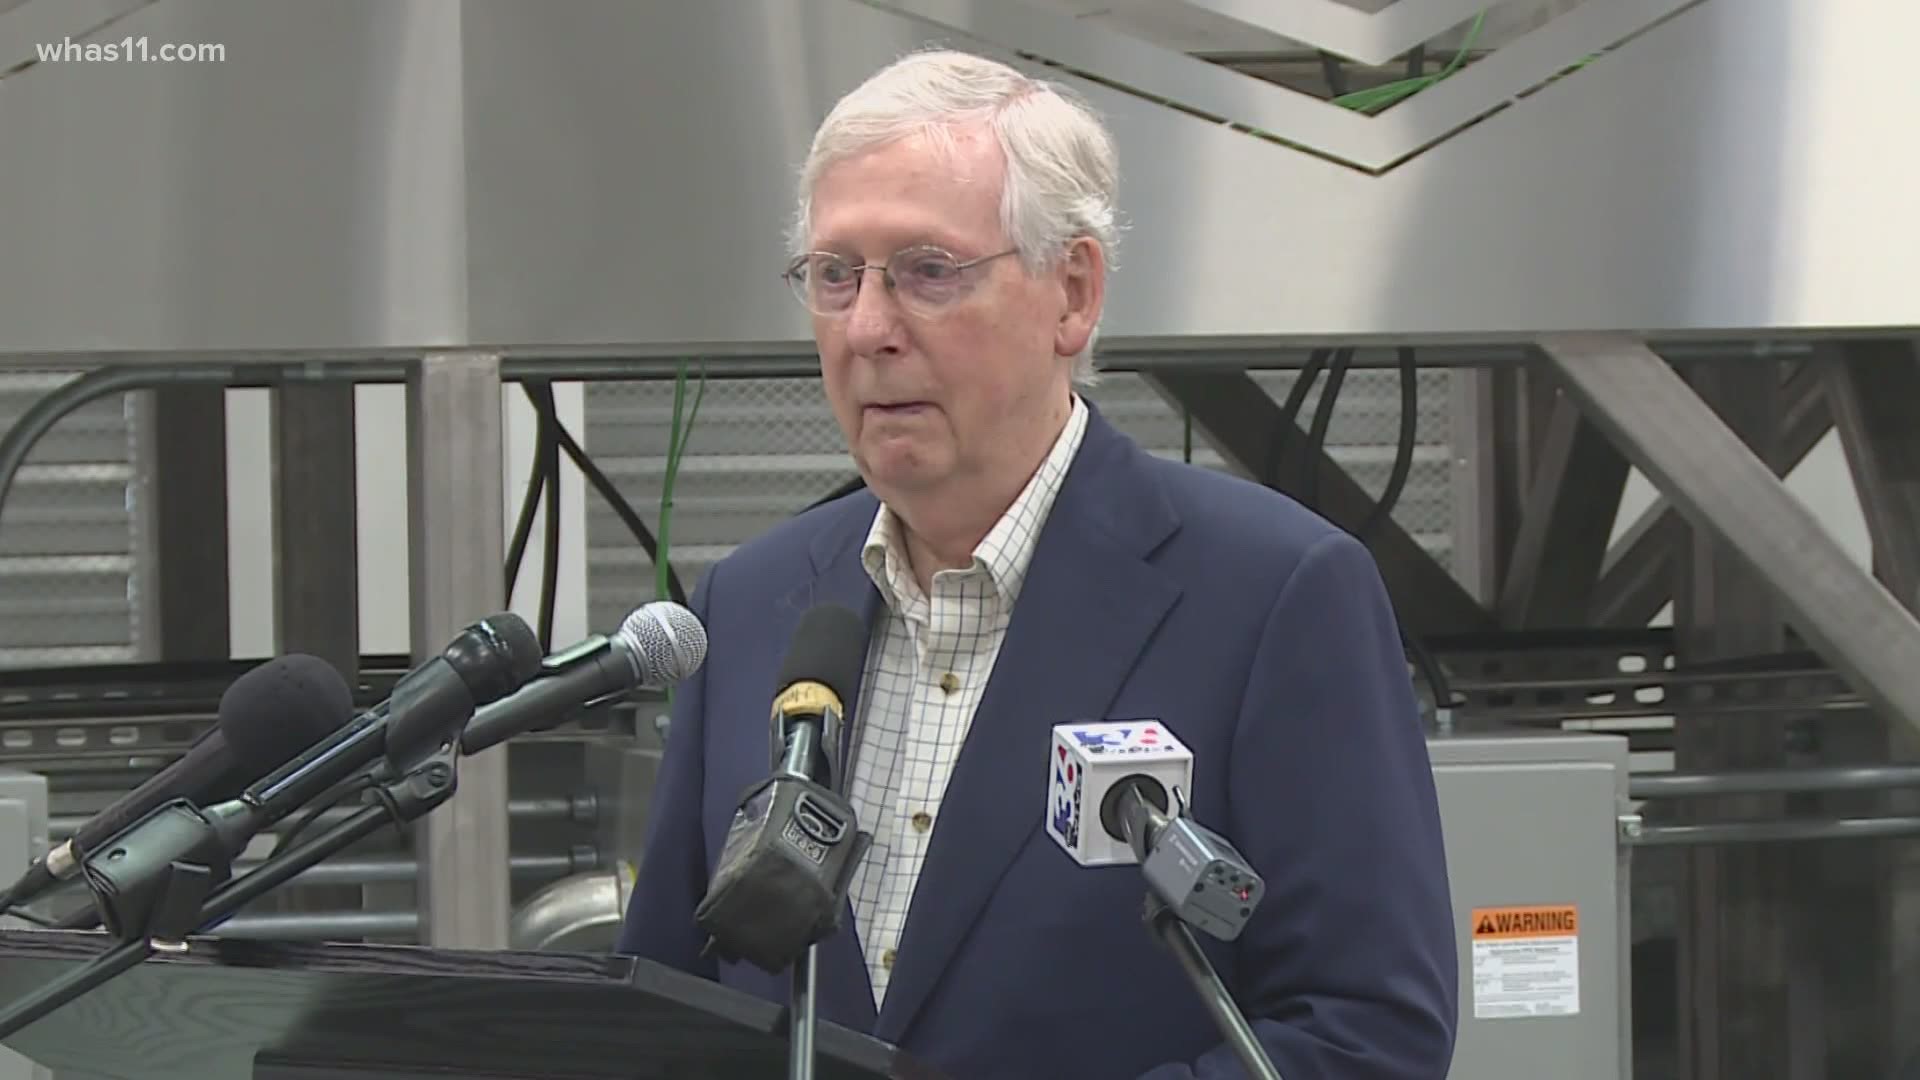 While in Georgetown, Sen. McConnell discusses a number of topics including protests in Louisville and the upcoming Kentucky Derby.